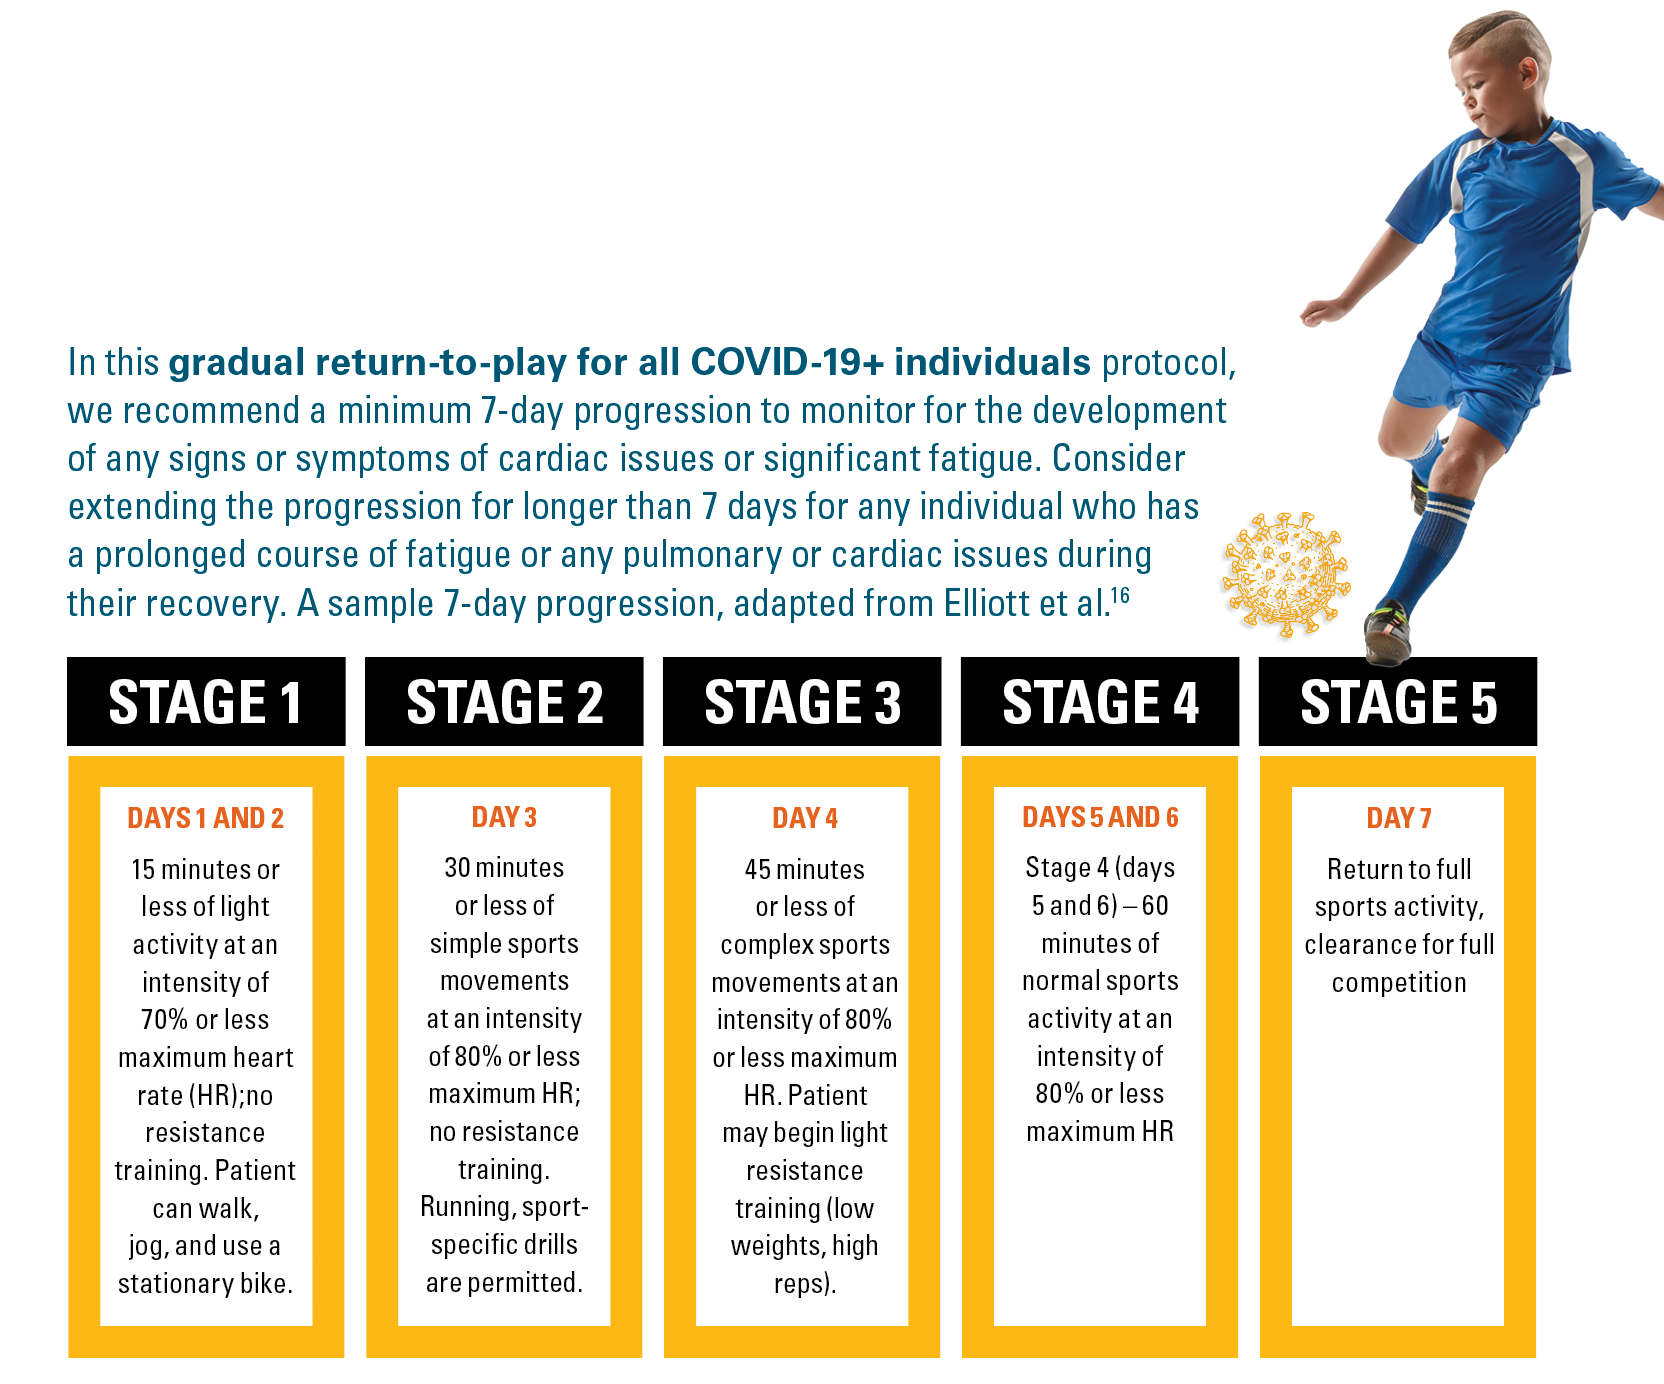 Stages of gradual return-to-play